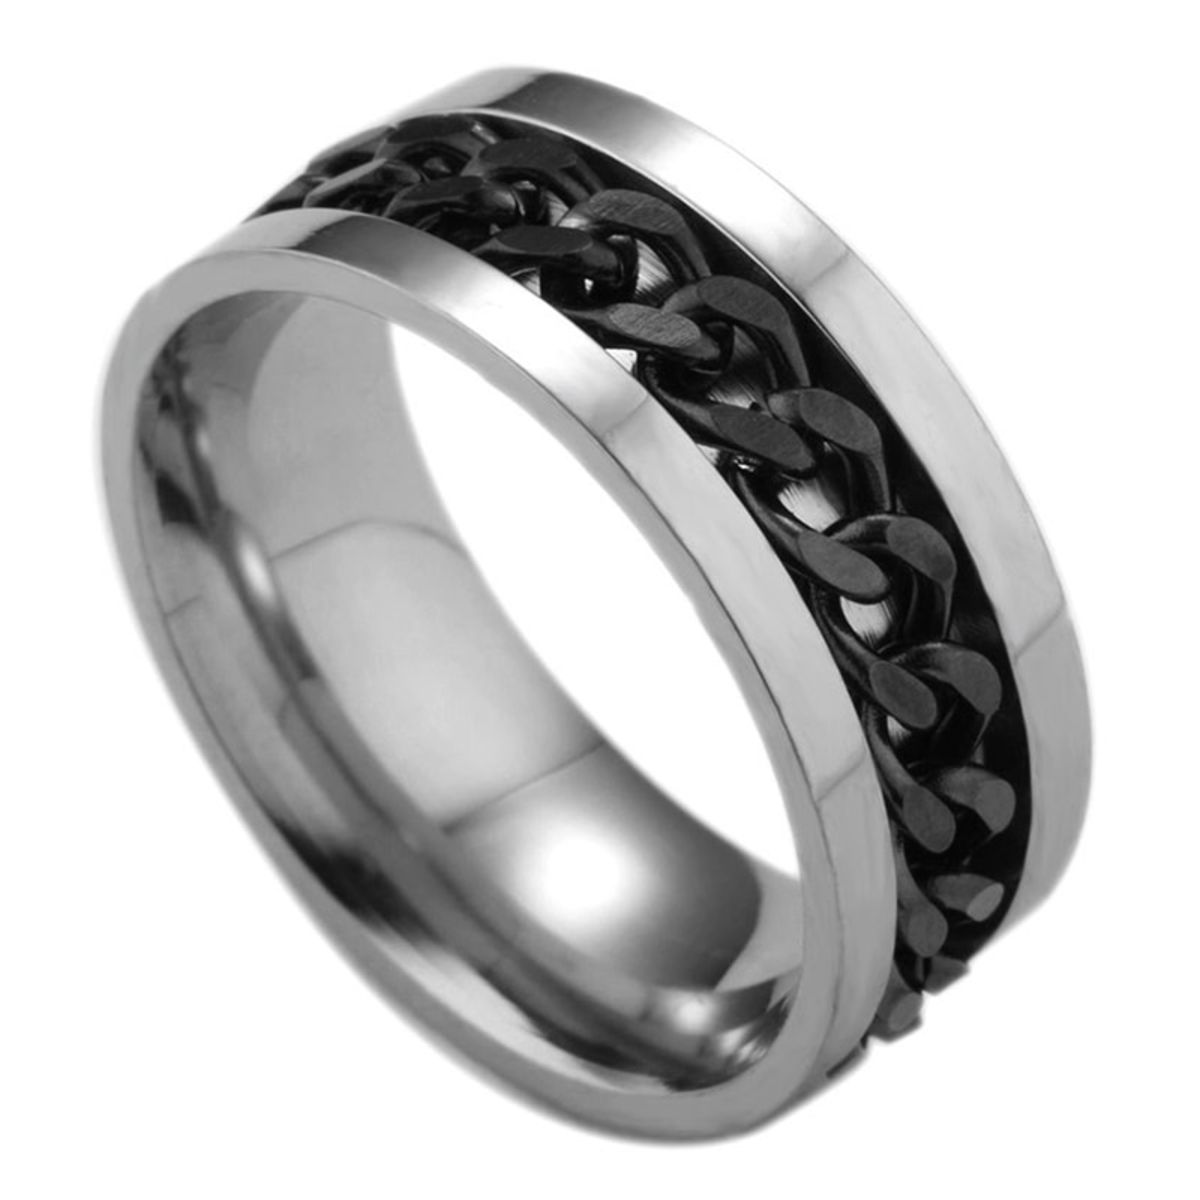 Amazon.com: Solid Silver Chain Ring, Oxidized Silver, Black-Silver Chain  Links, 925 Solid Sterling Silver, Thin Curb Chain, Unisex Ring, Gift For Men  and Women/code: 0.002 : Handmade Products